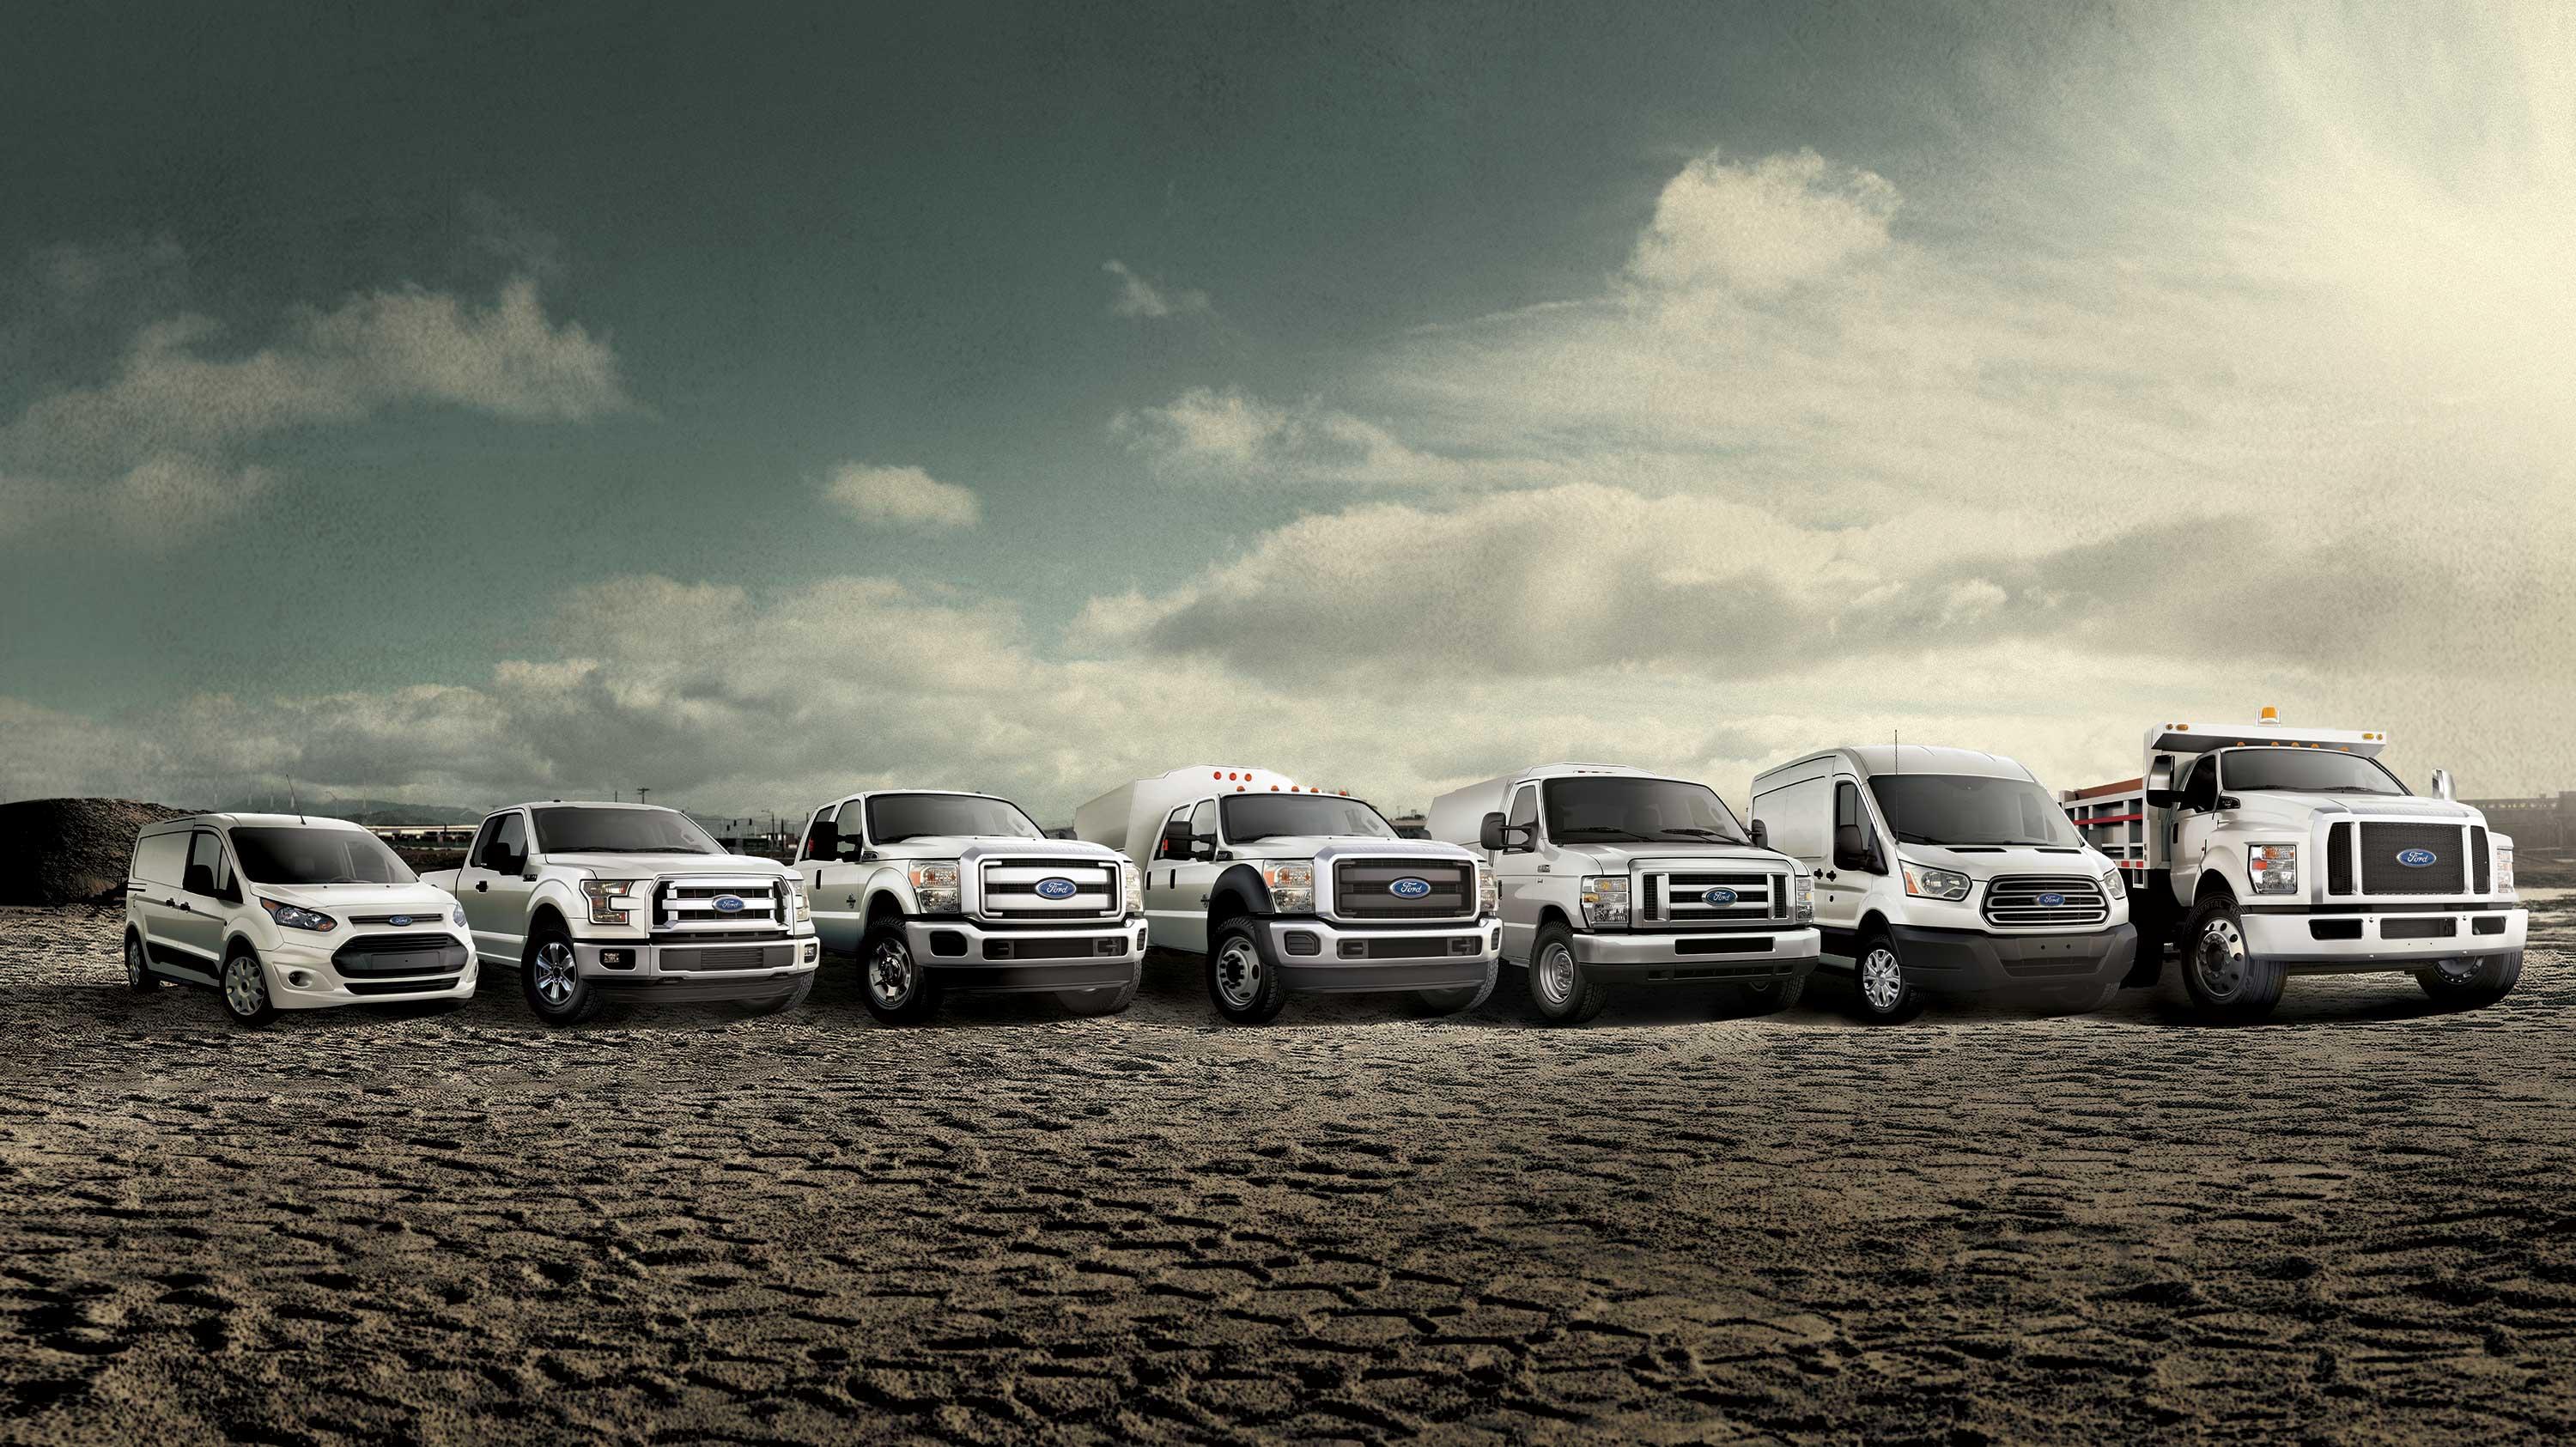 Ford Truck Lineup